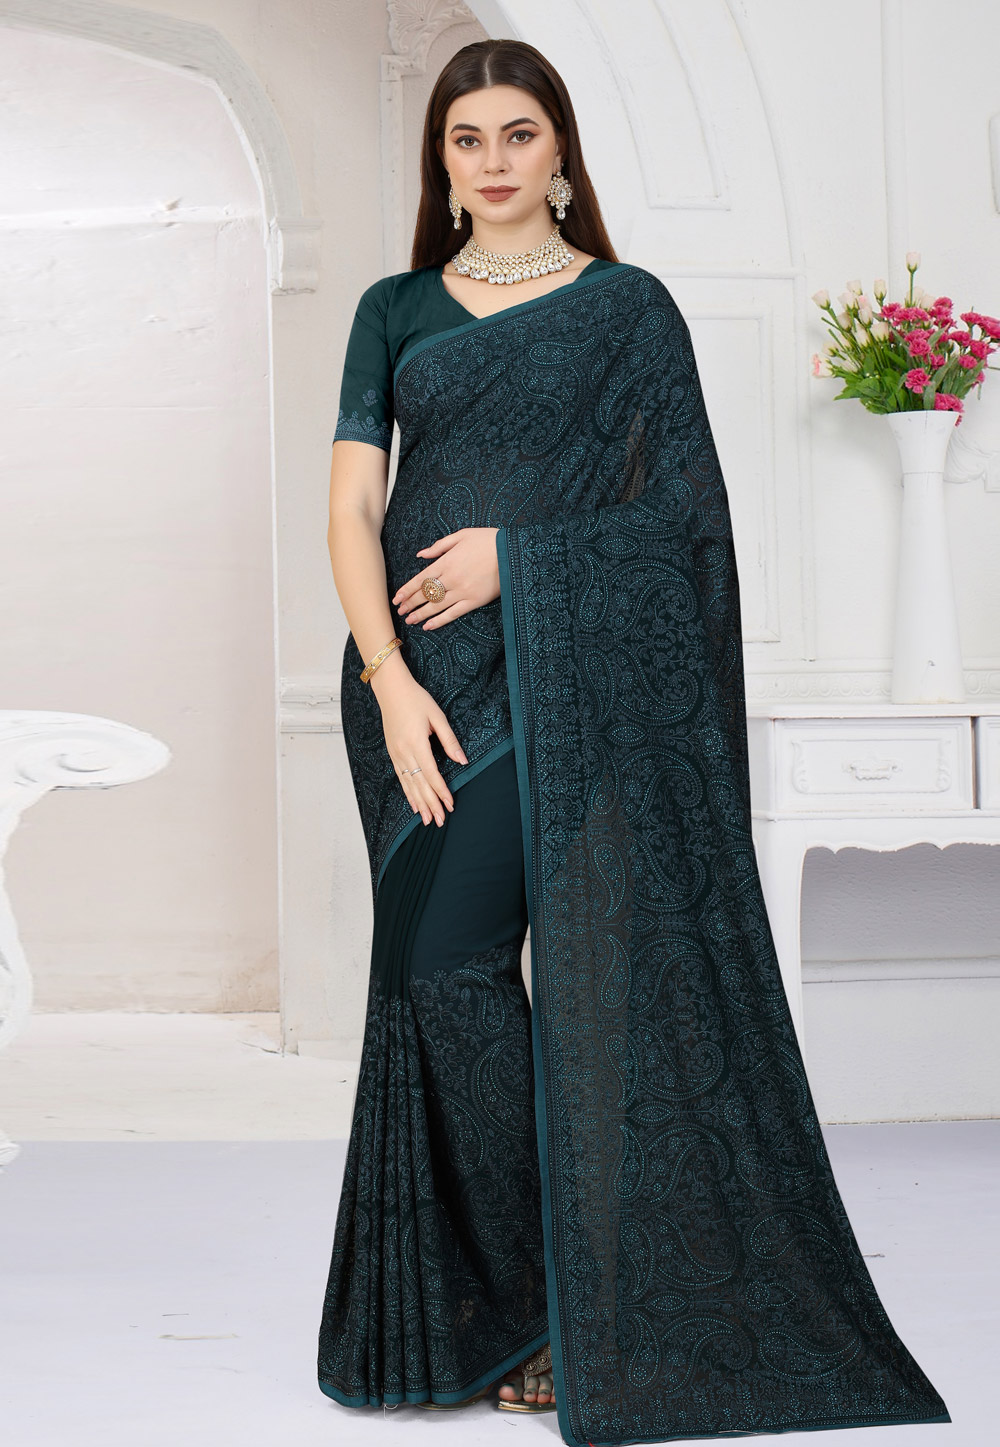 Teal Georgette Saree With Blouse 258363